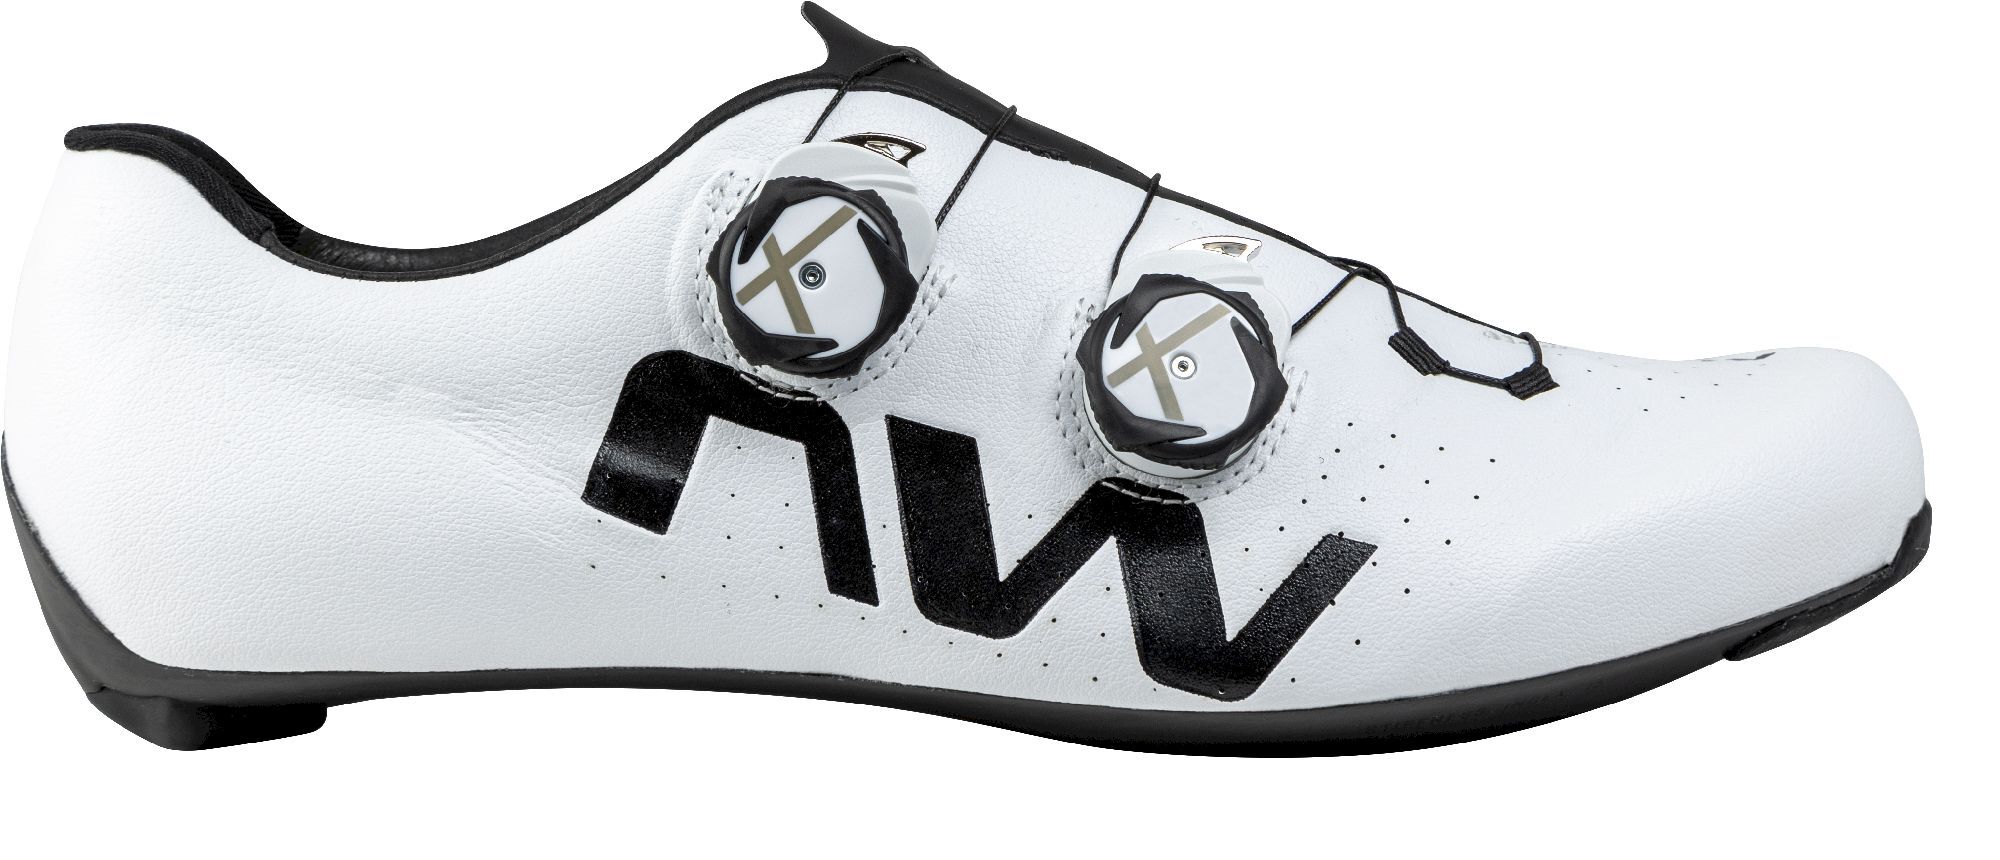 Northwave Veloce Extreme - Cycling shoes - Men's | Hardloop